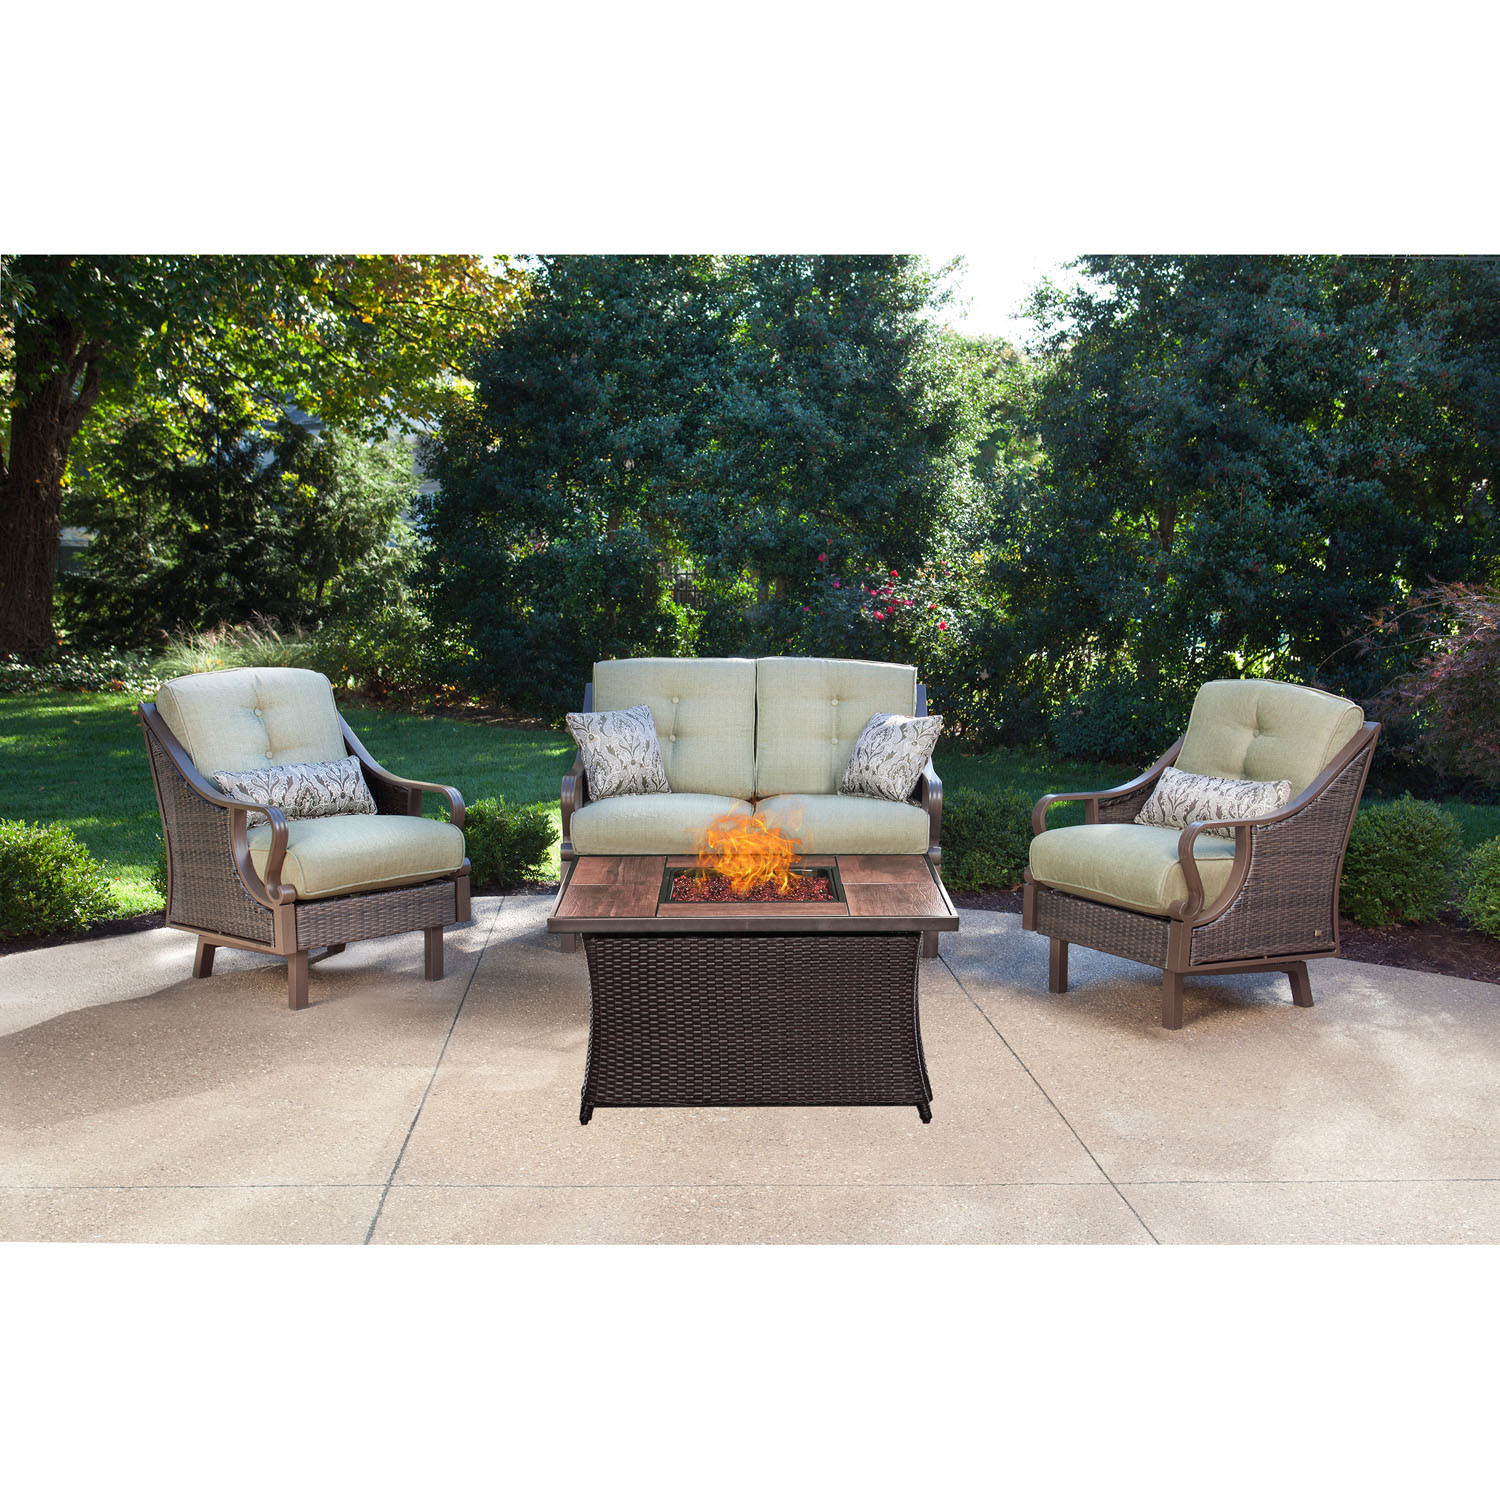 Hanover Ventura 4 Pcs Wicker and Steel Propane Fire Pit Chat Set, Vintage Meadow - image 1 of 10